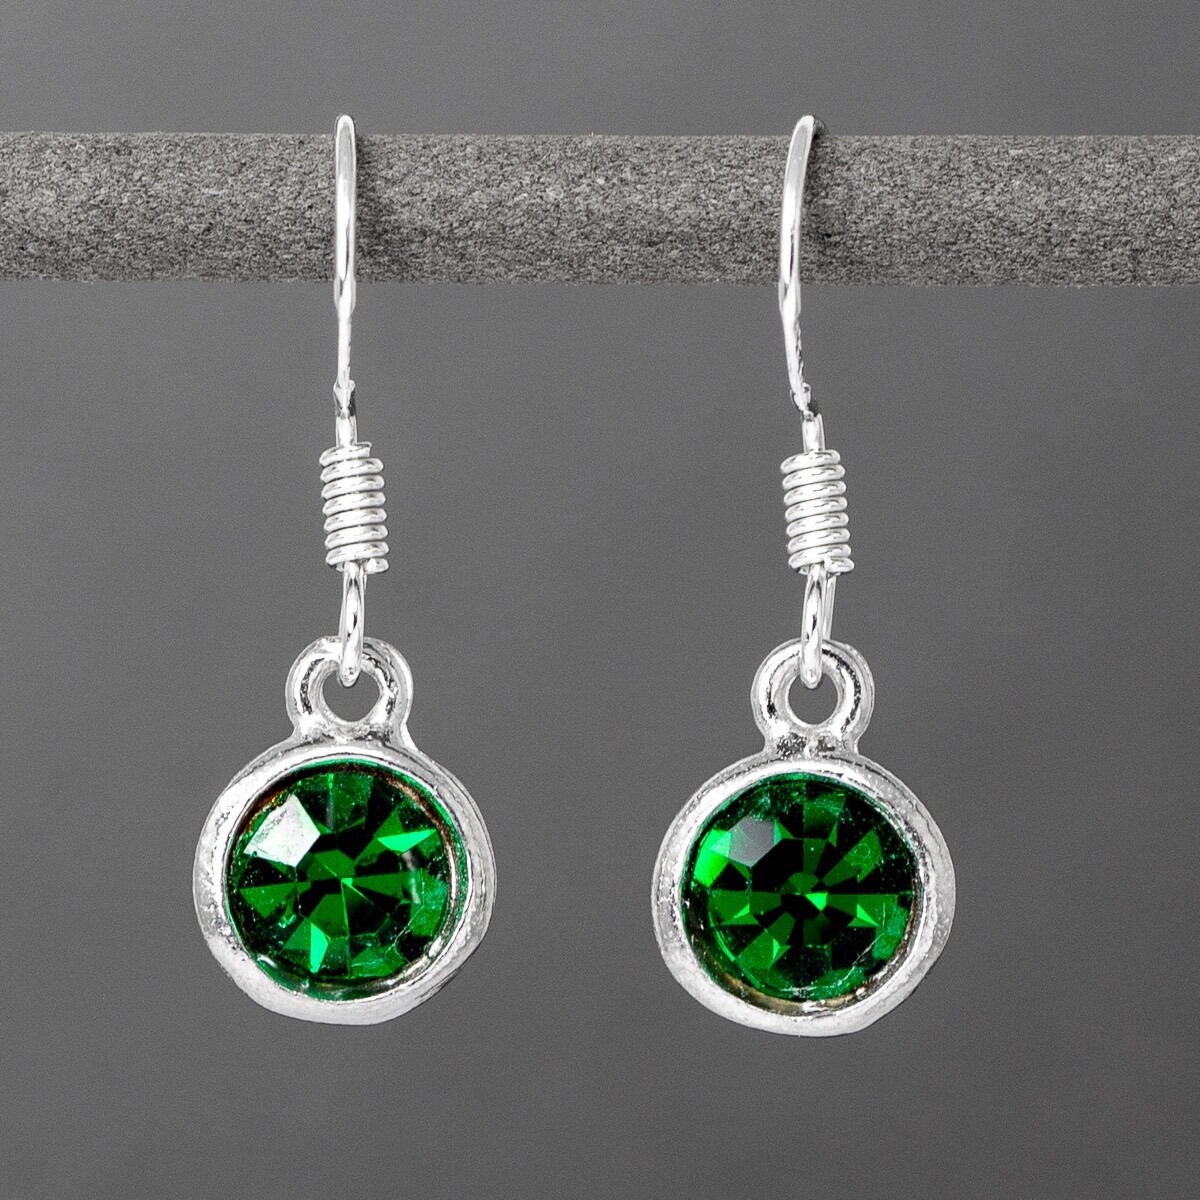 Crystal and Pewter Drop Earrings - Emerald by Metal Planet